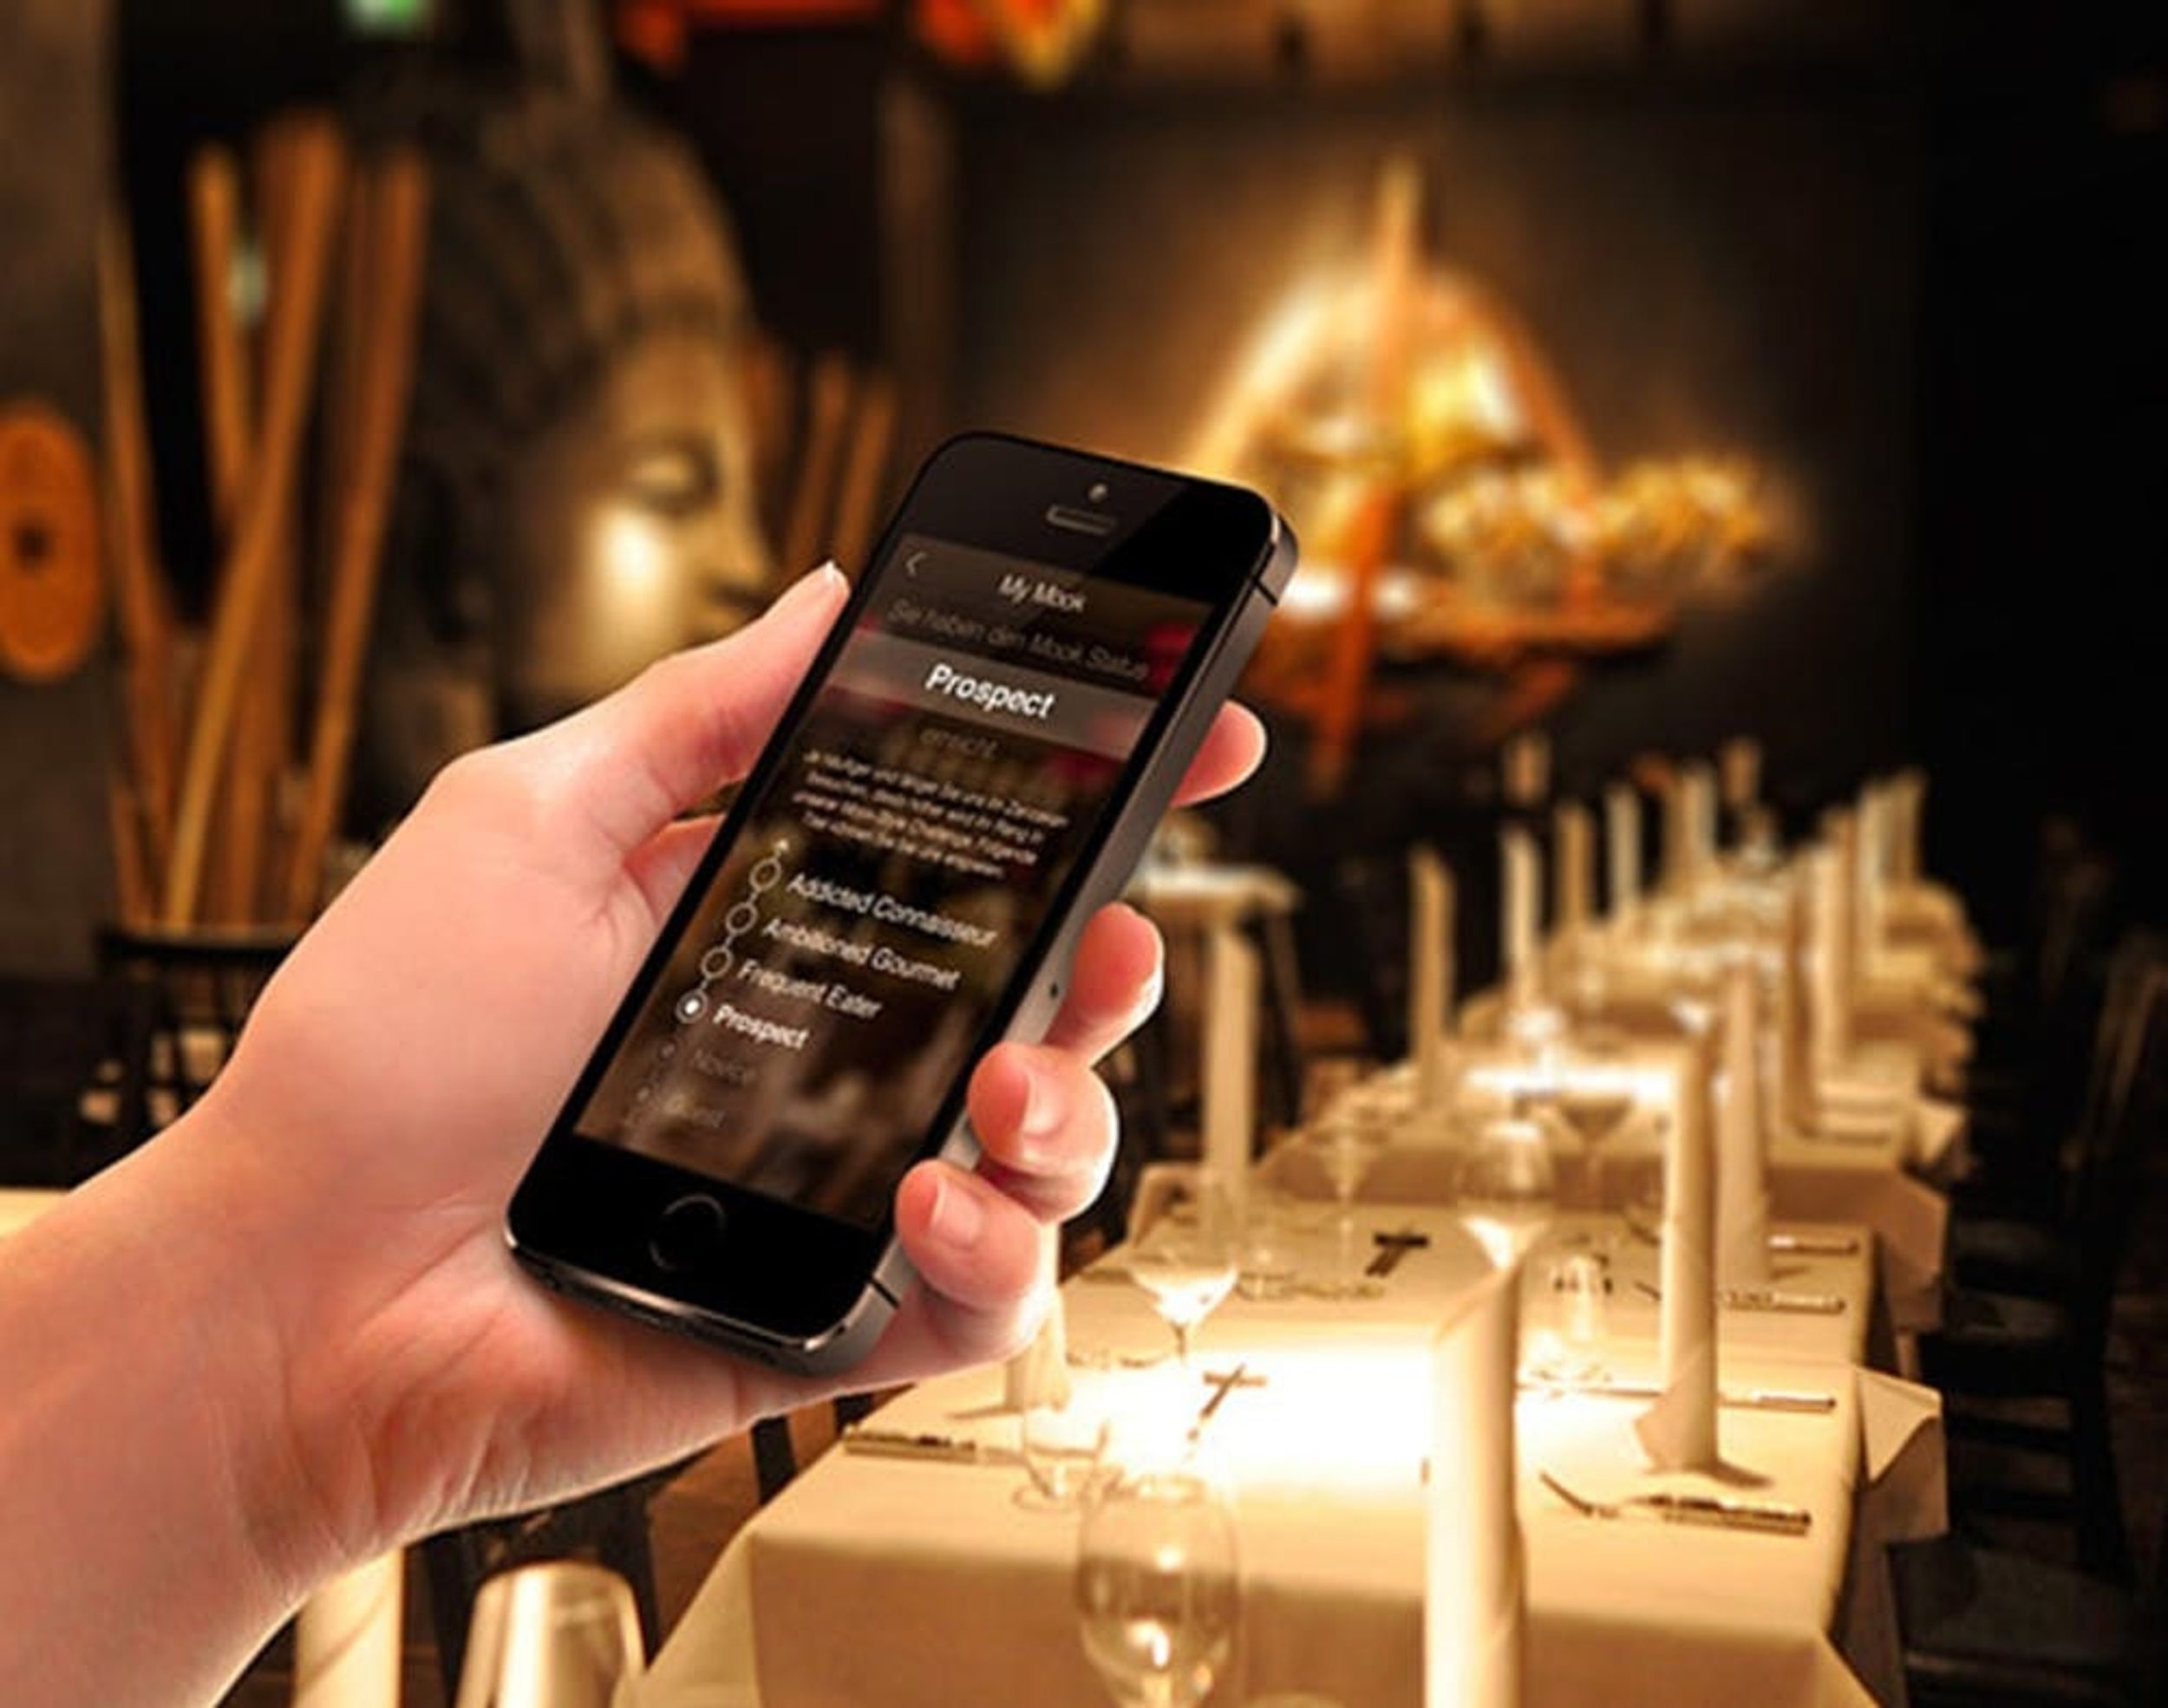 Would You Use This Creepy Restaurant App?